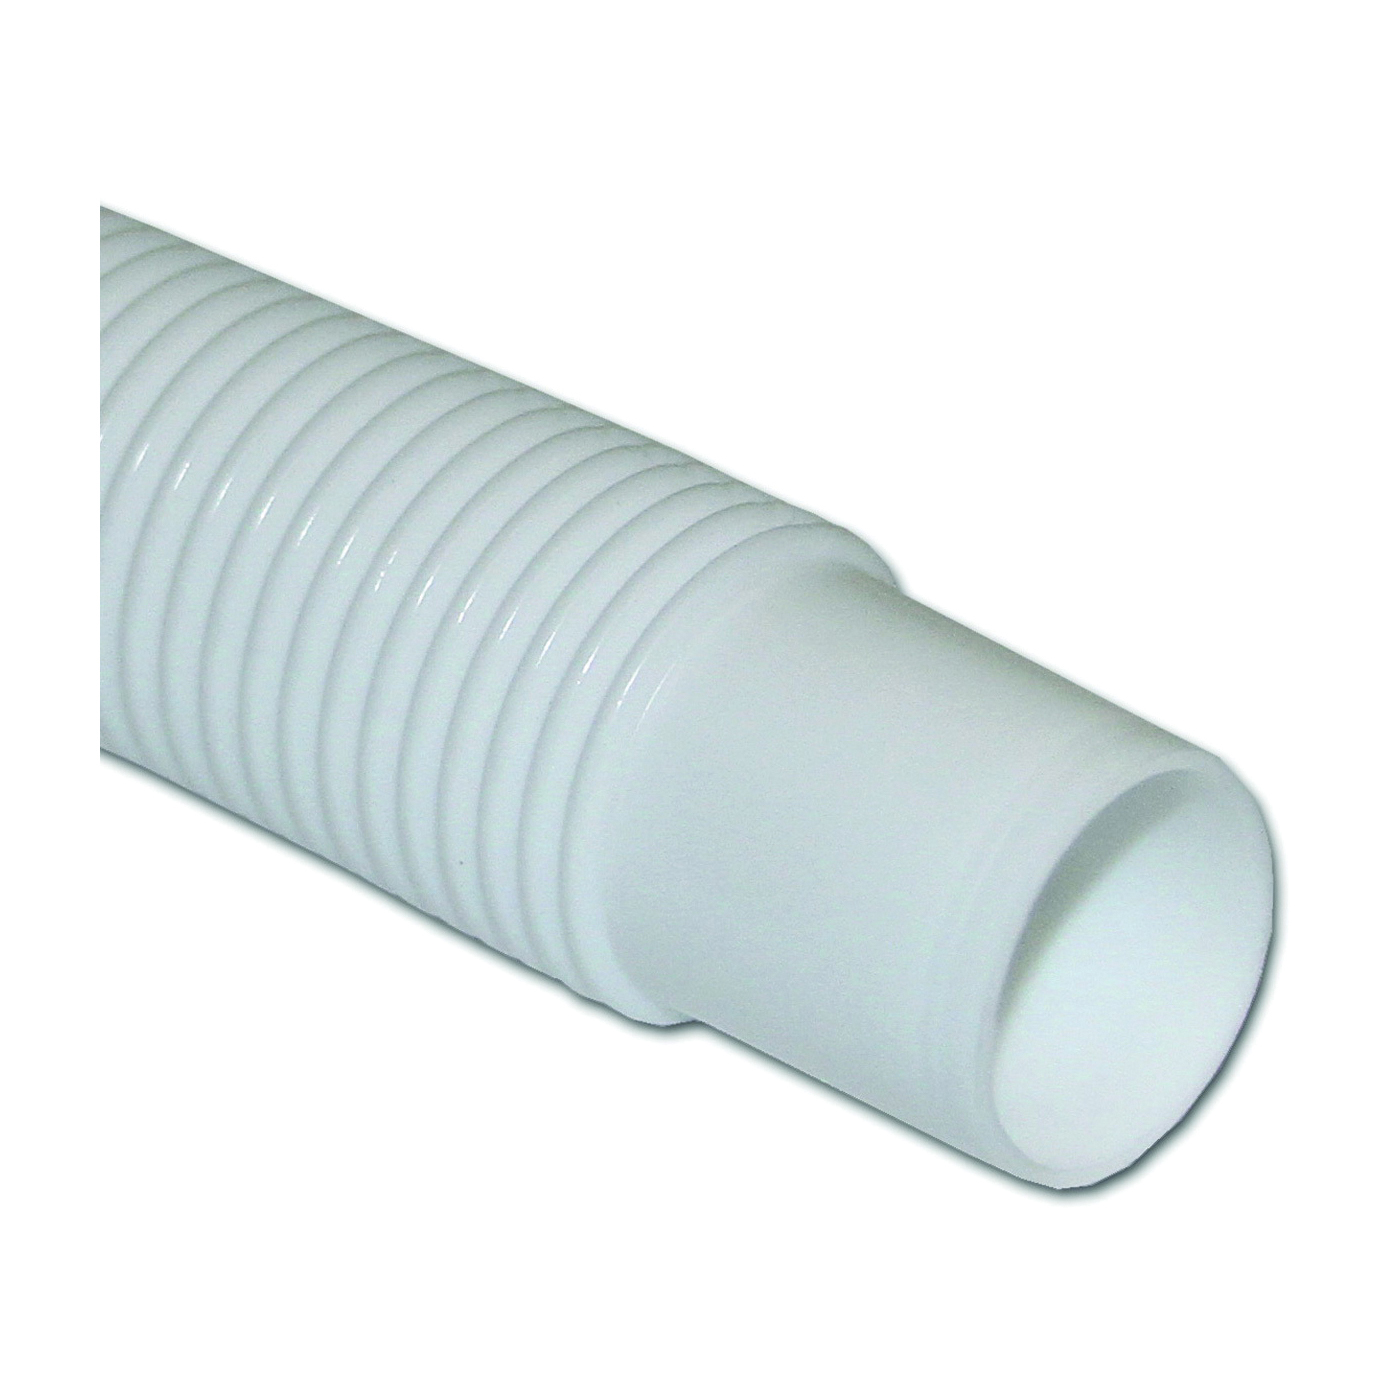 T34 Series T34005002/RBBO Discharge Hose, 1-1/8 in ID, 50 ft L, Polyethylene, Milky White